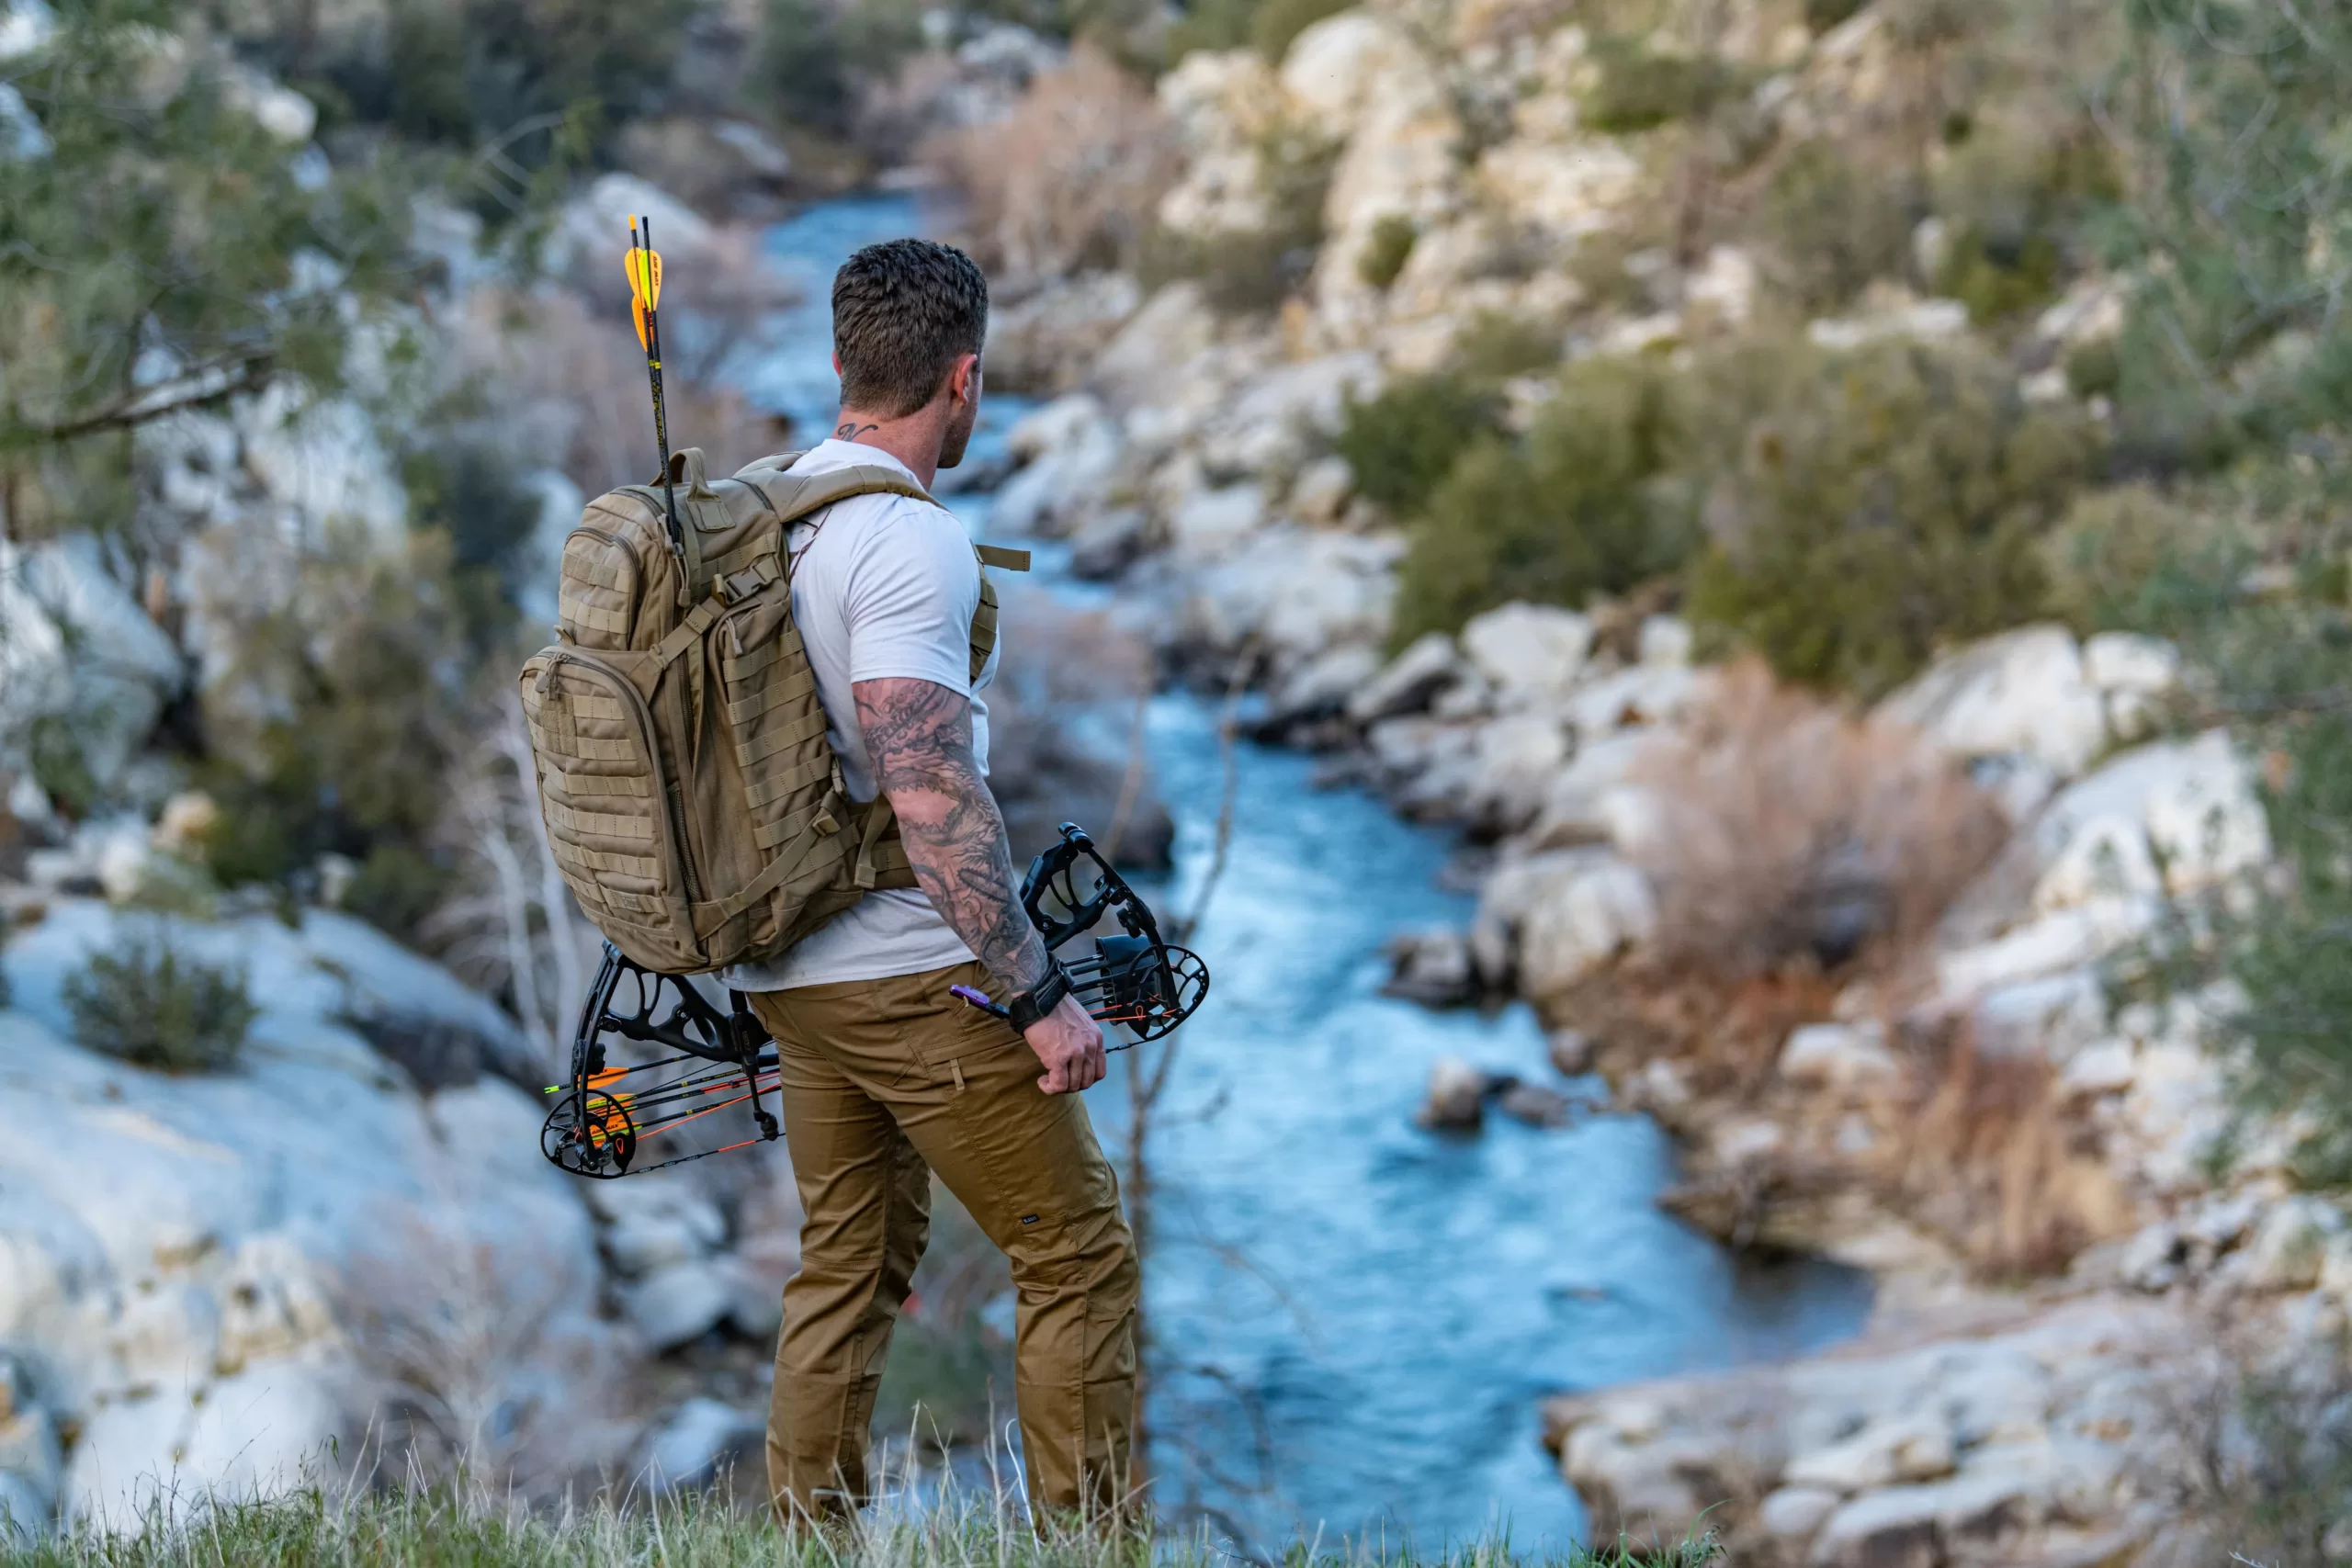 5.11 Tactical - From outdoor adventure to your daily